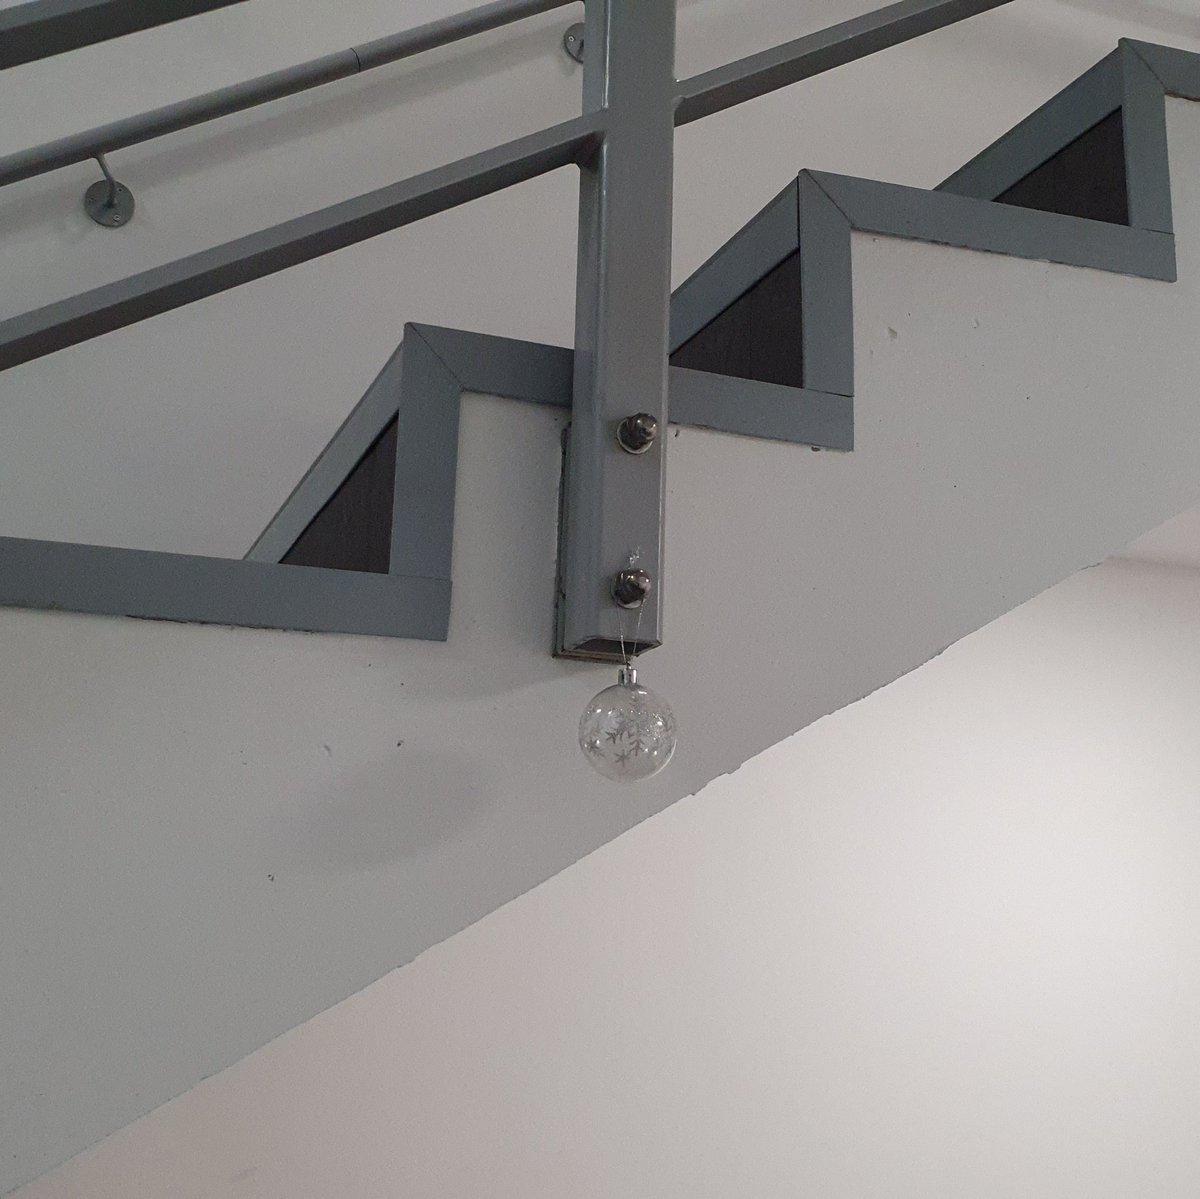 Although @KingstonUni have taken down their #Xmas decorations, a single escapee bauble can still be spotted in a back staircase... but how did it get there and why? #themysteryofthelonebauble